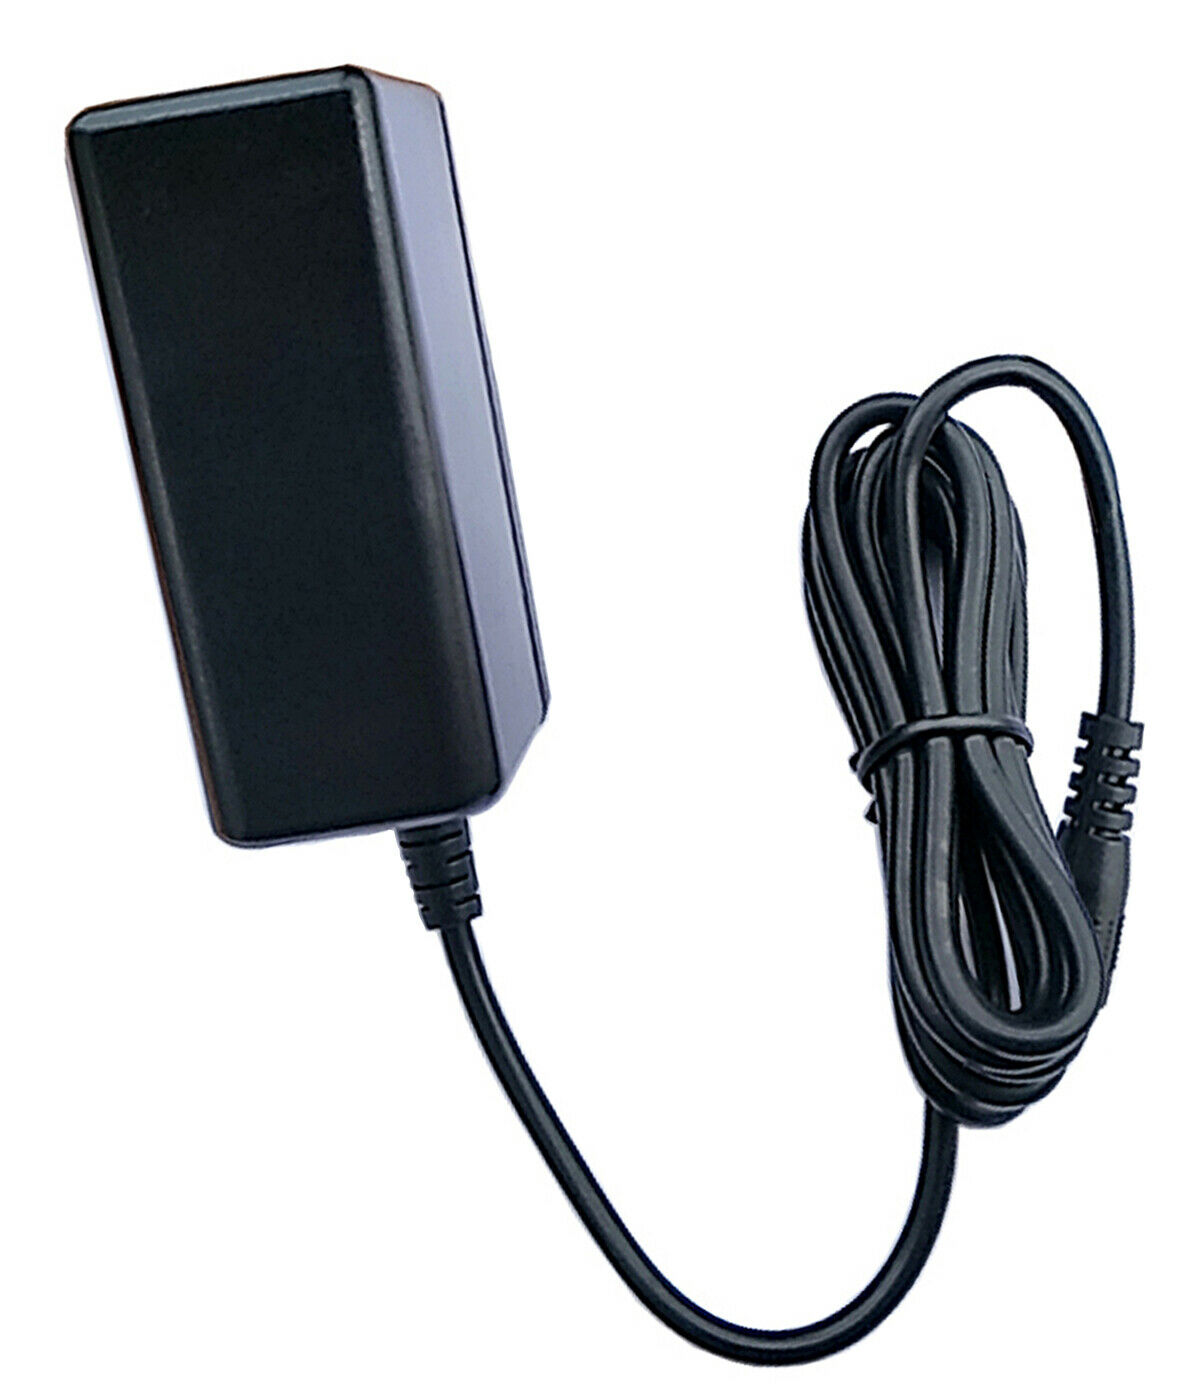 12V 2A AC/DC Adapter Wall Charger For LCDS Power Cord W/ 5.5*3.0mm Pin PSU Input Voltage: AC 100-240V, 50/60Hz Output: